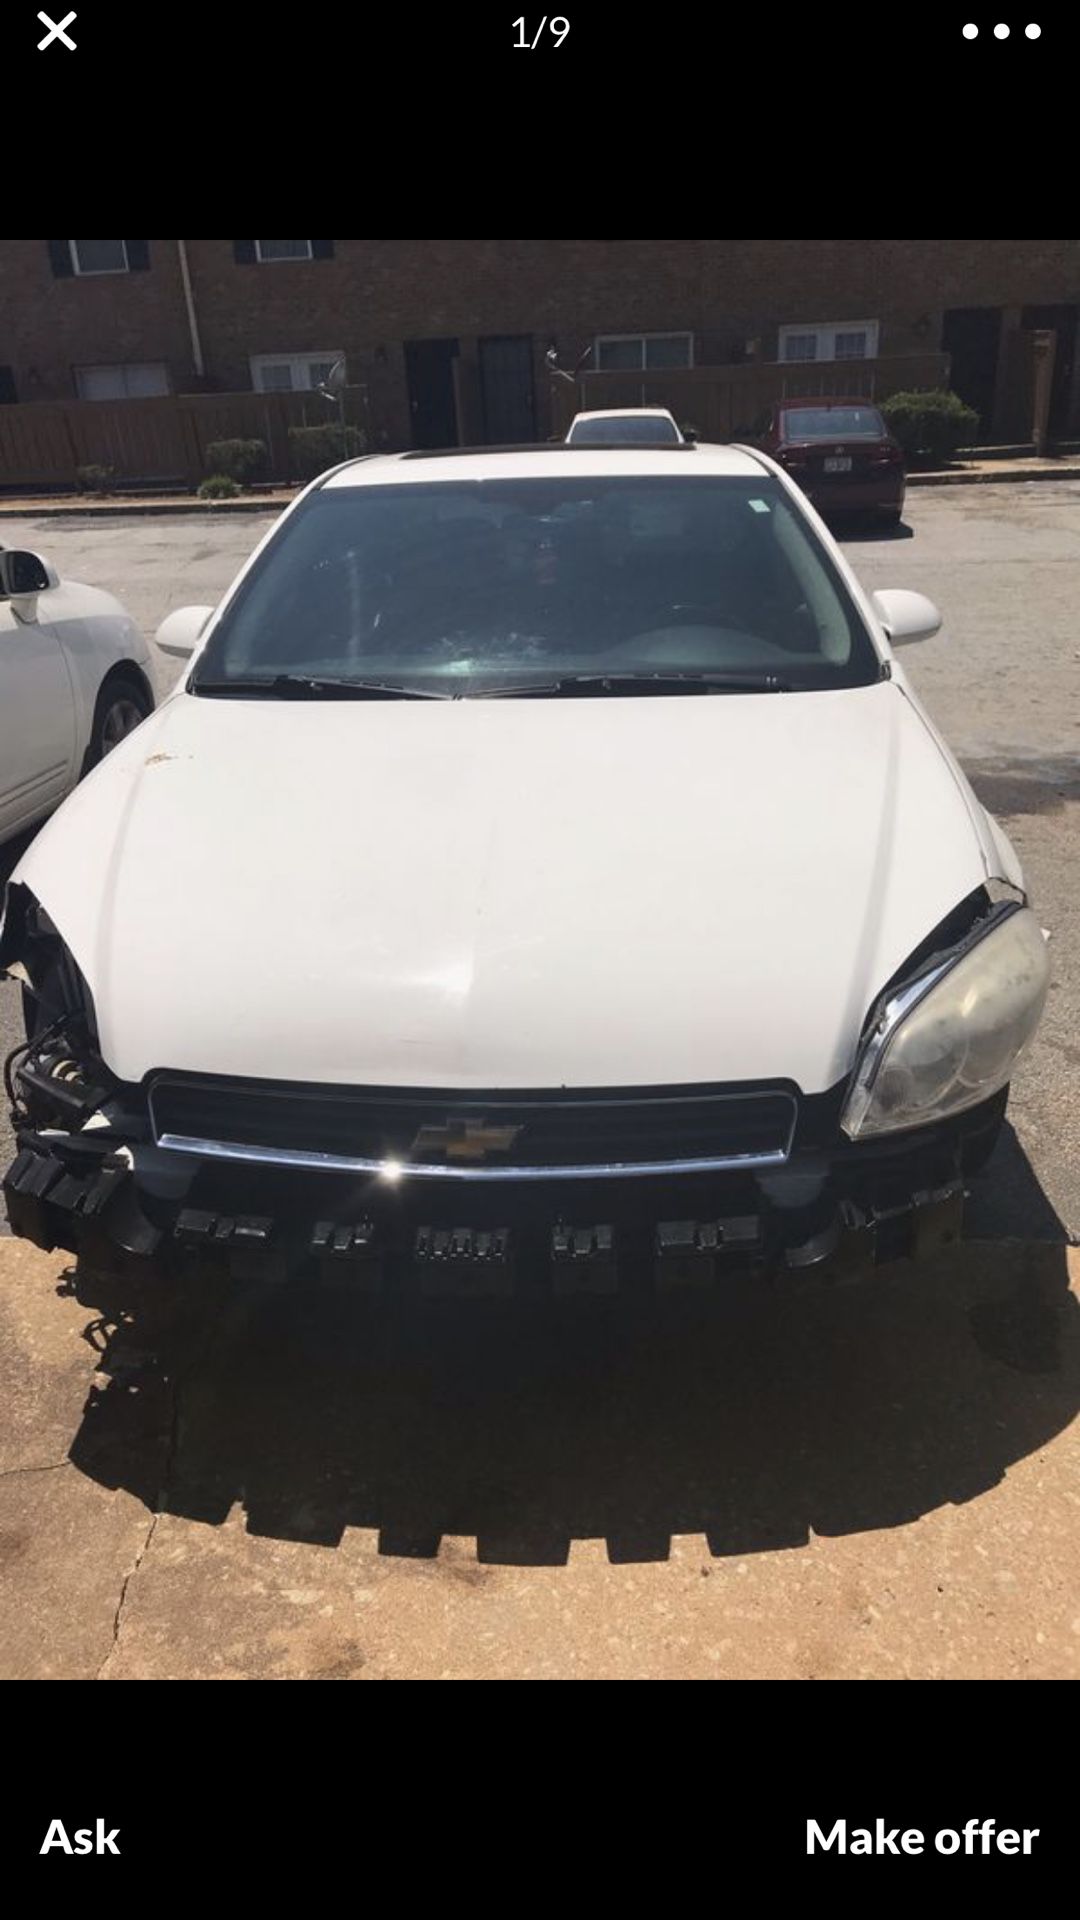 2011 Chevy impala a shattered window and only the front end of the car is damaged it still runs, but for parts only, has great motor and transmission